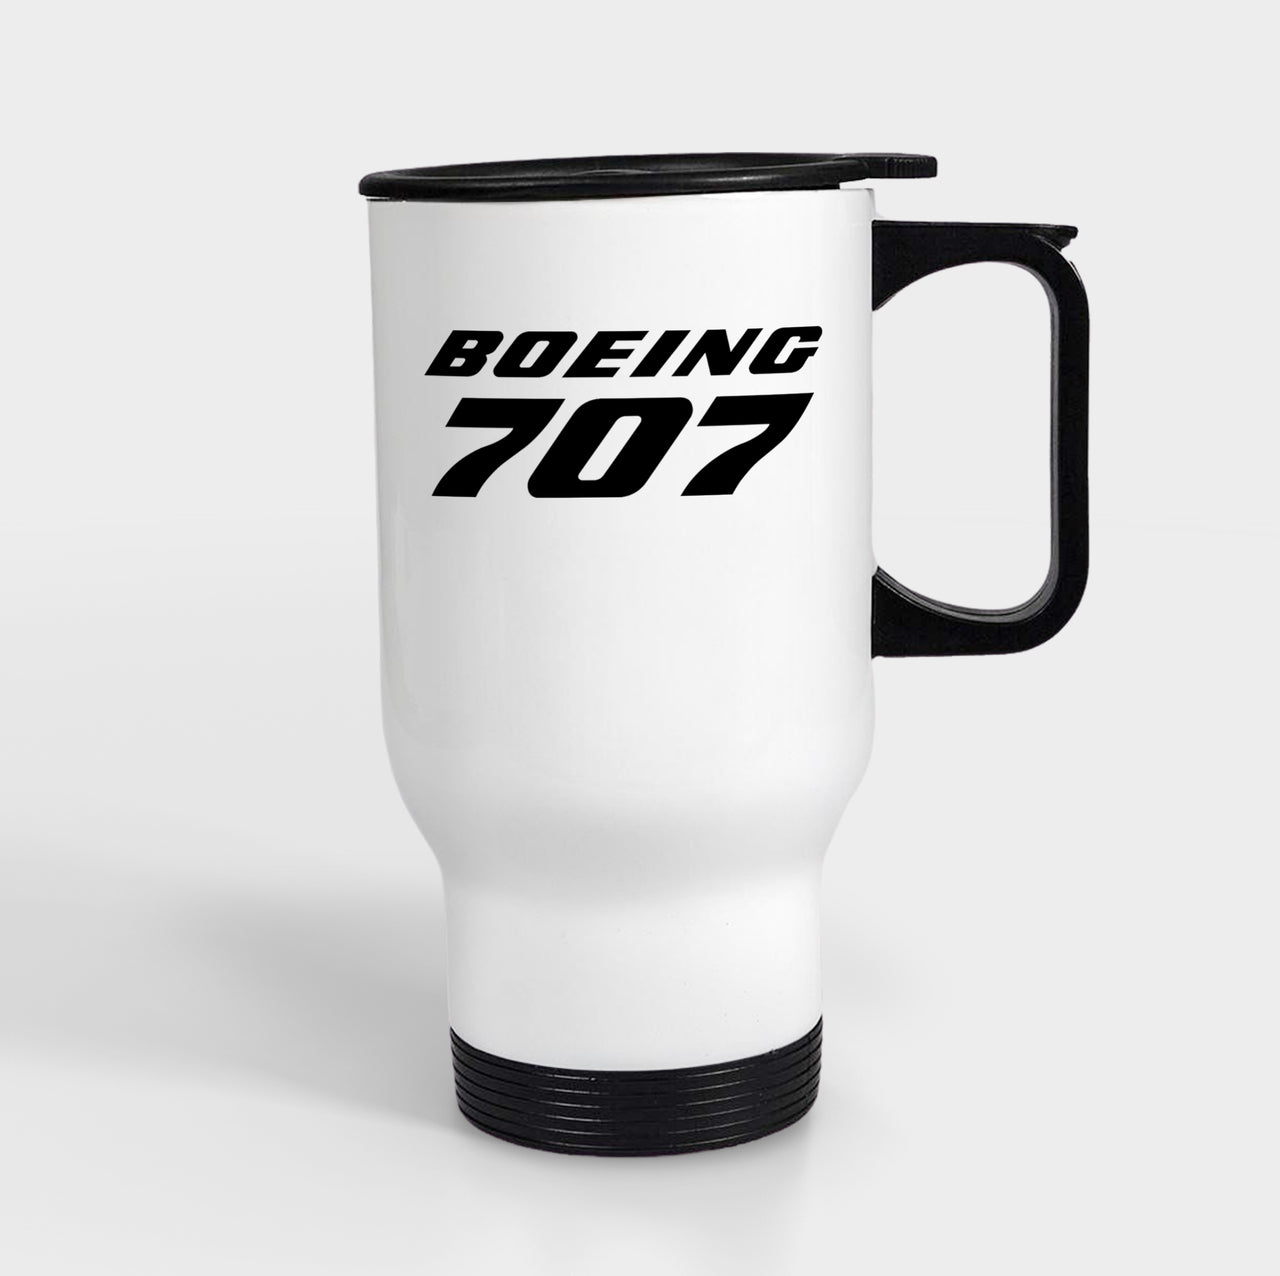 Boeing 707 & Text Designed Travel Mugs (With Holder)